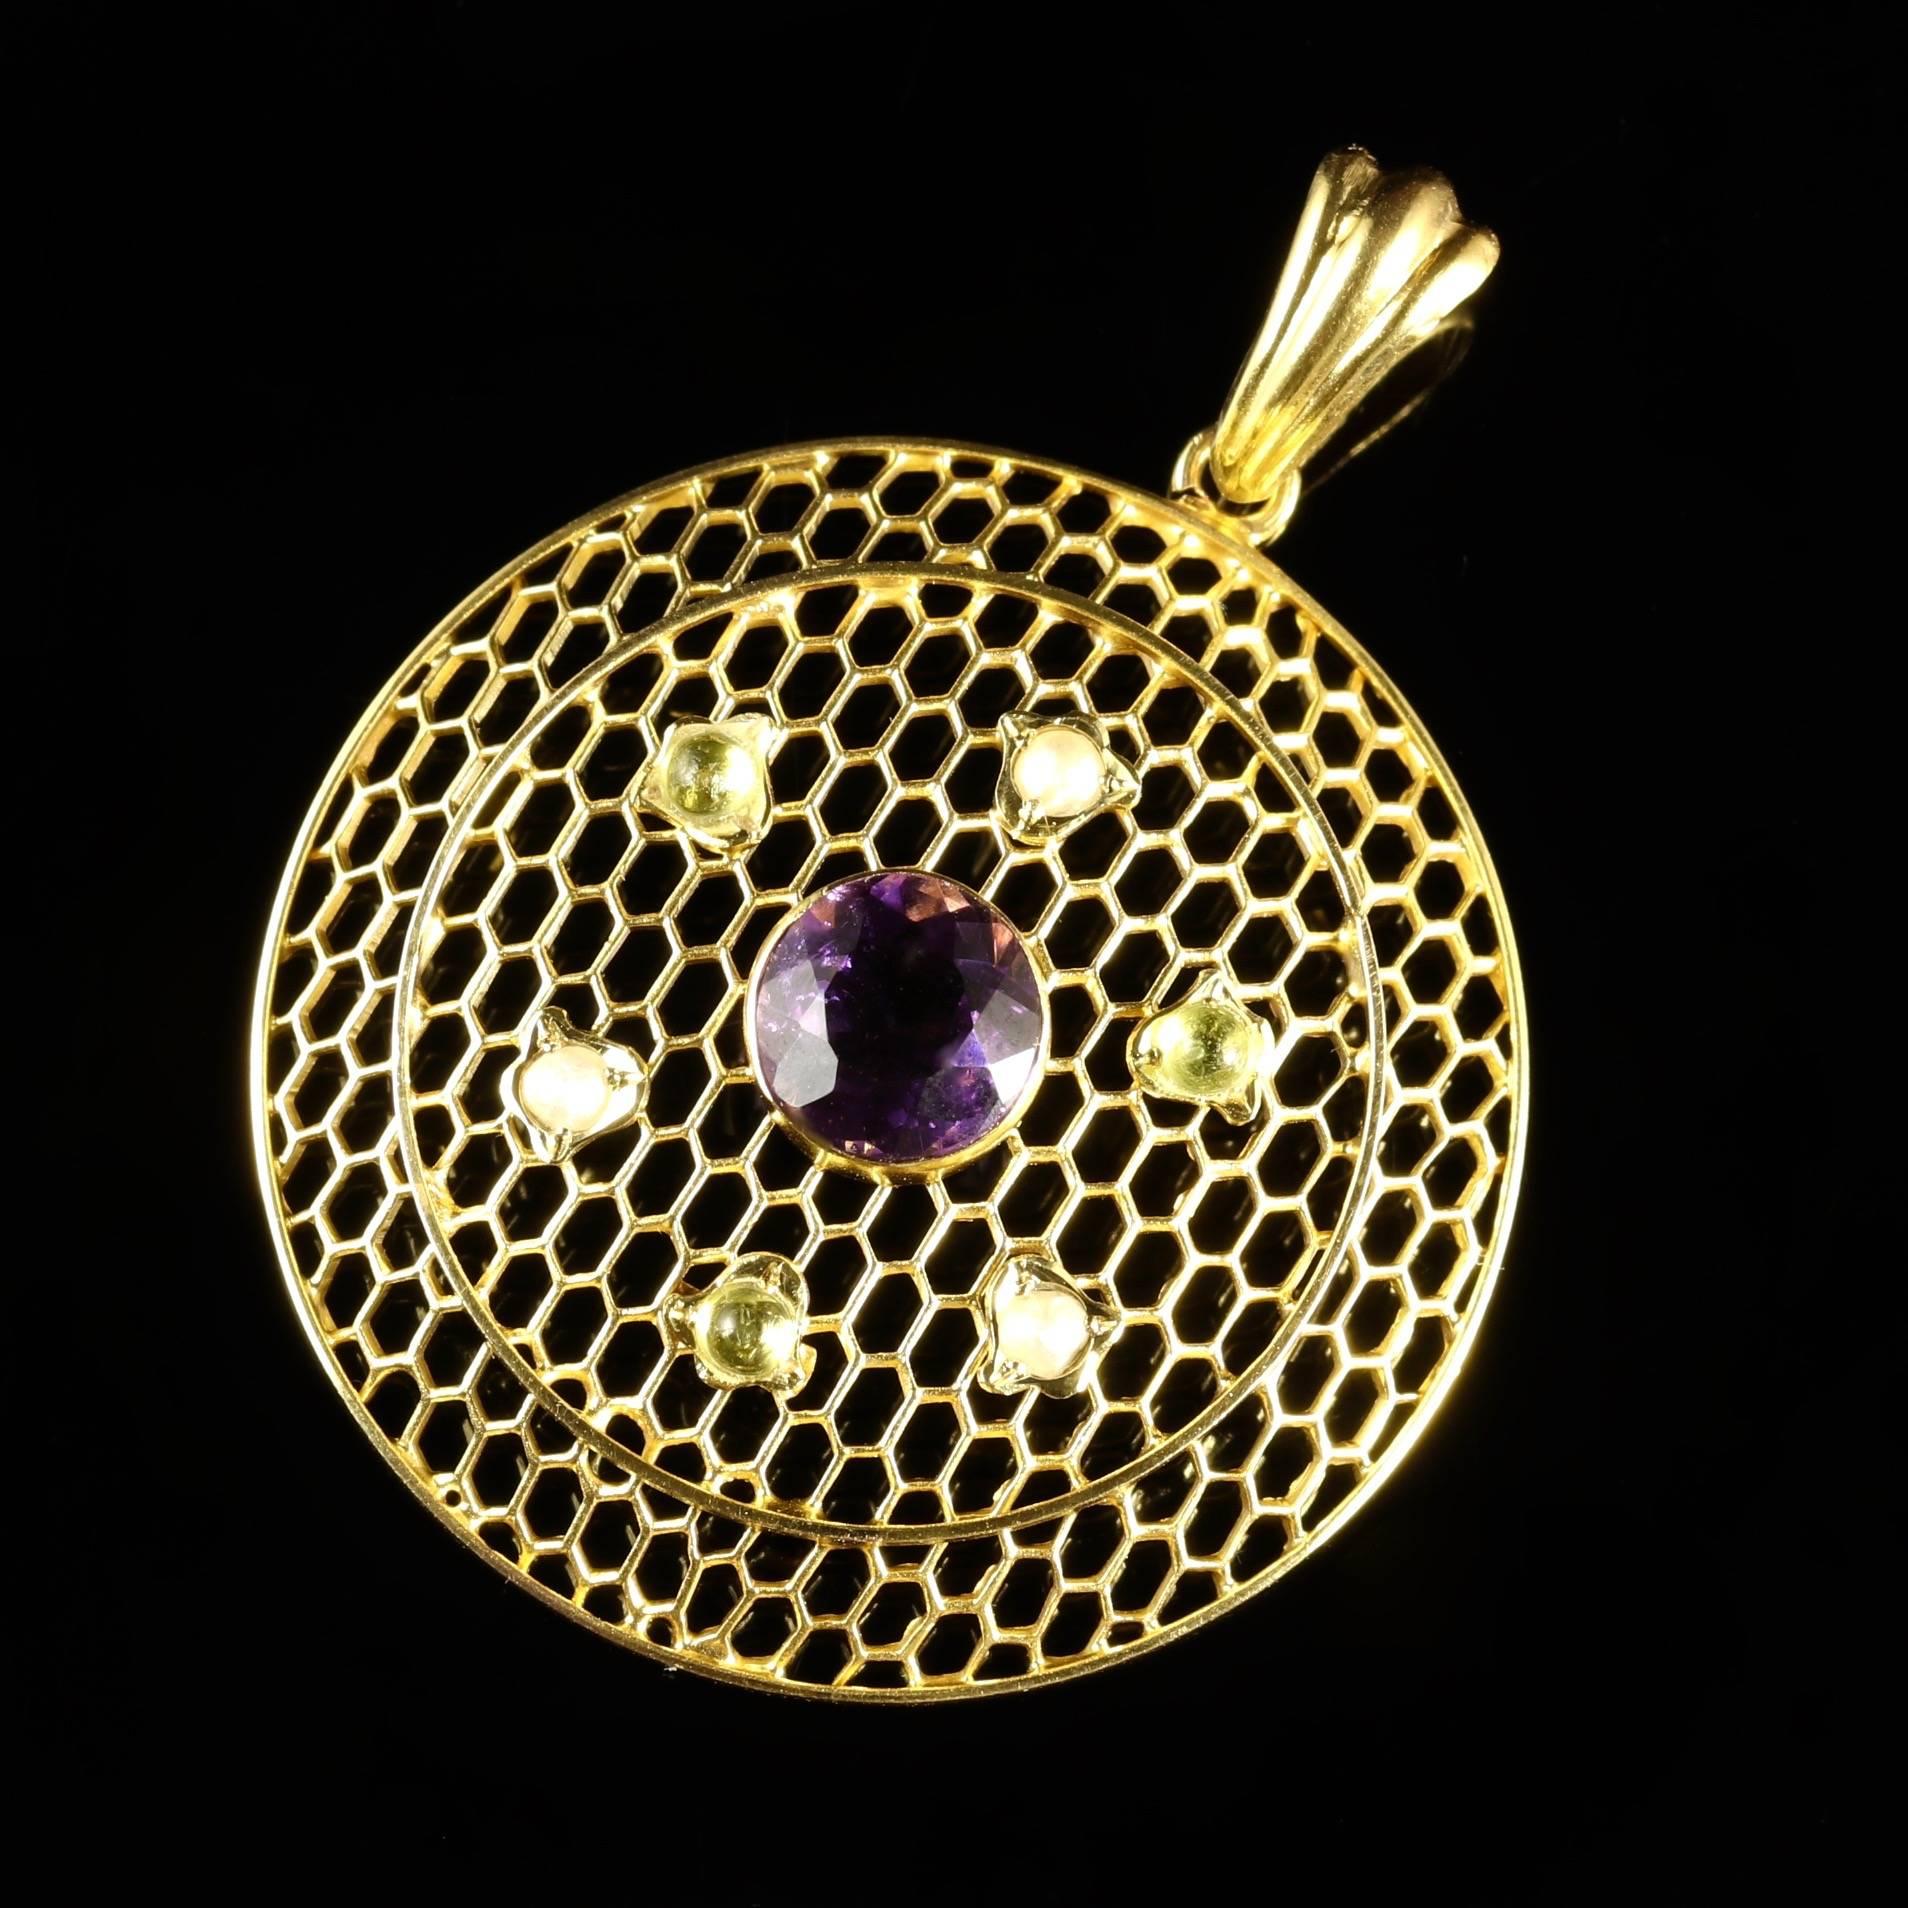 This fabulous Victorian 9ct Gold pendant is Circa 1900. 

The wonderful round pendant has a bright 1.75ct Amethyst in the centre, which is surrounded by Peridots and Pearls.

Emmeline Pankhurst was the leader of the British Suffragette movement in